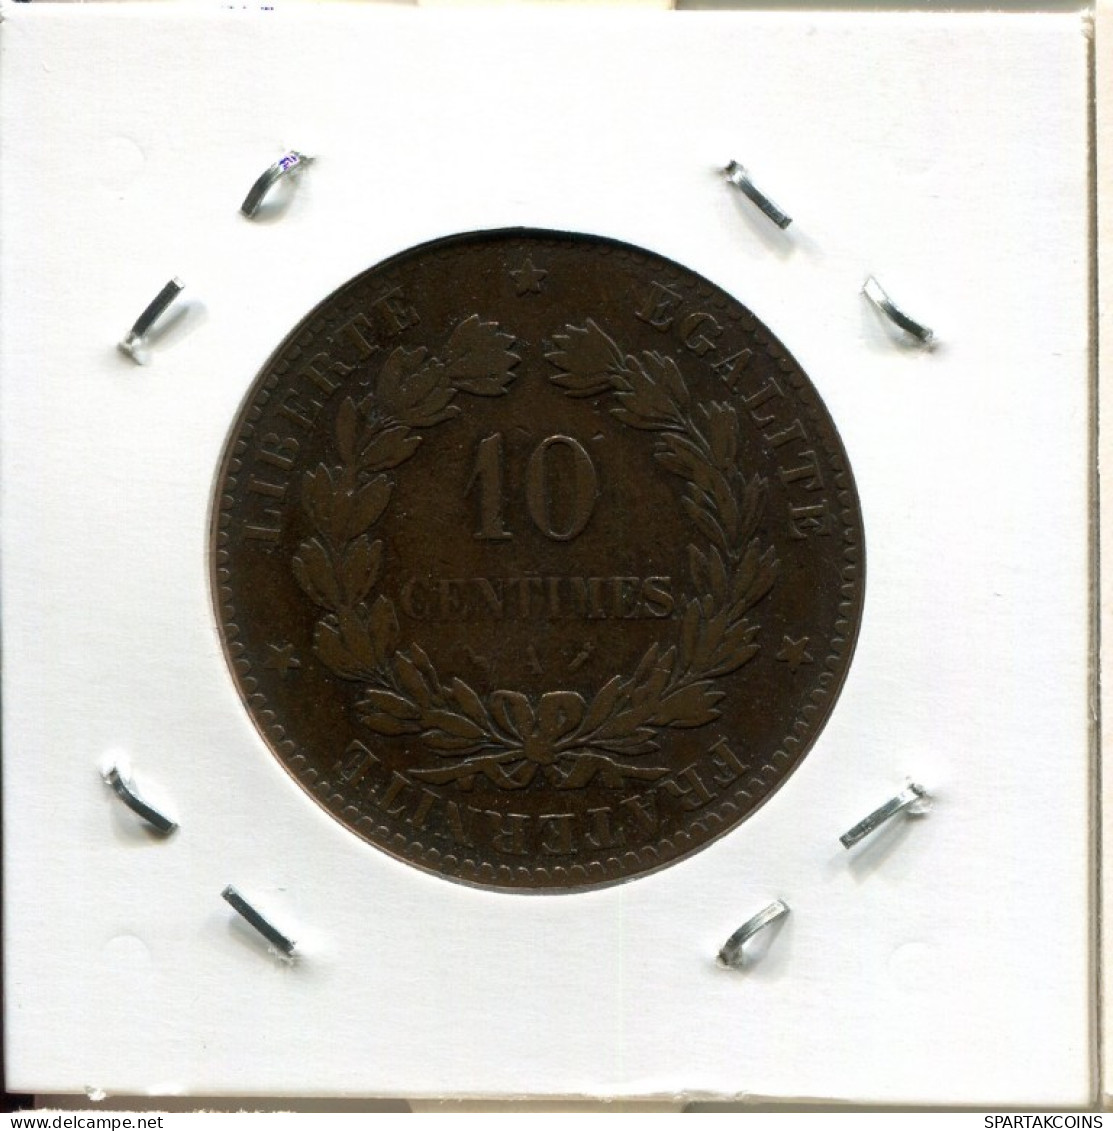 10 CENTIMES 1881 A FRANCE French Coin #AM075.U.A - 10 Centimes